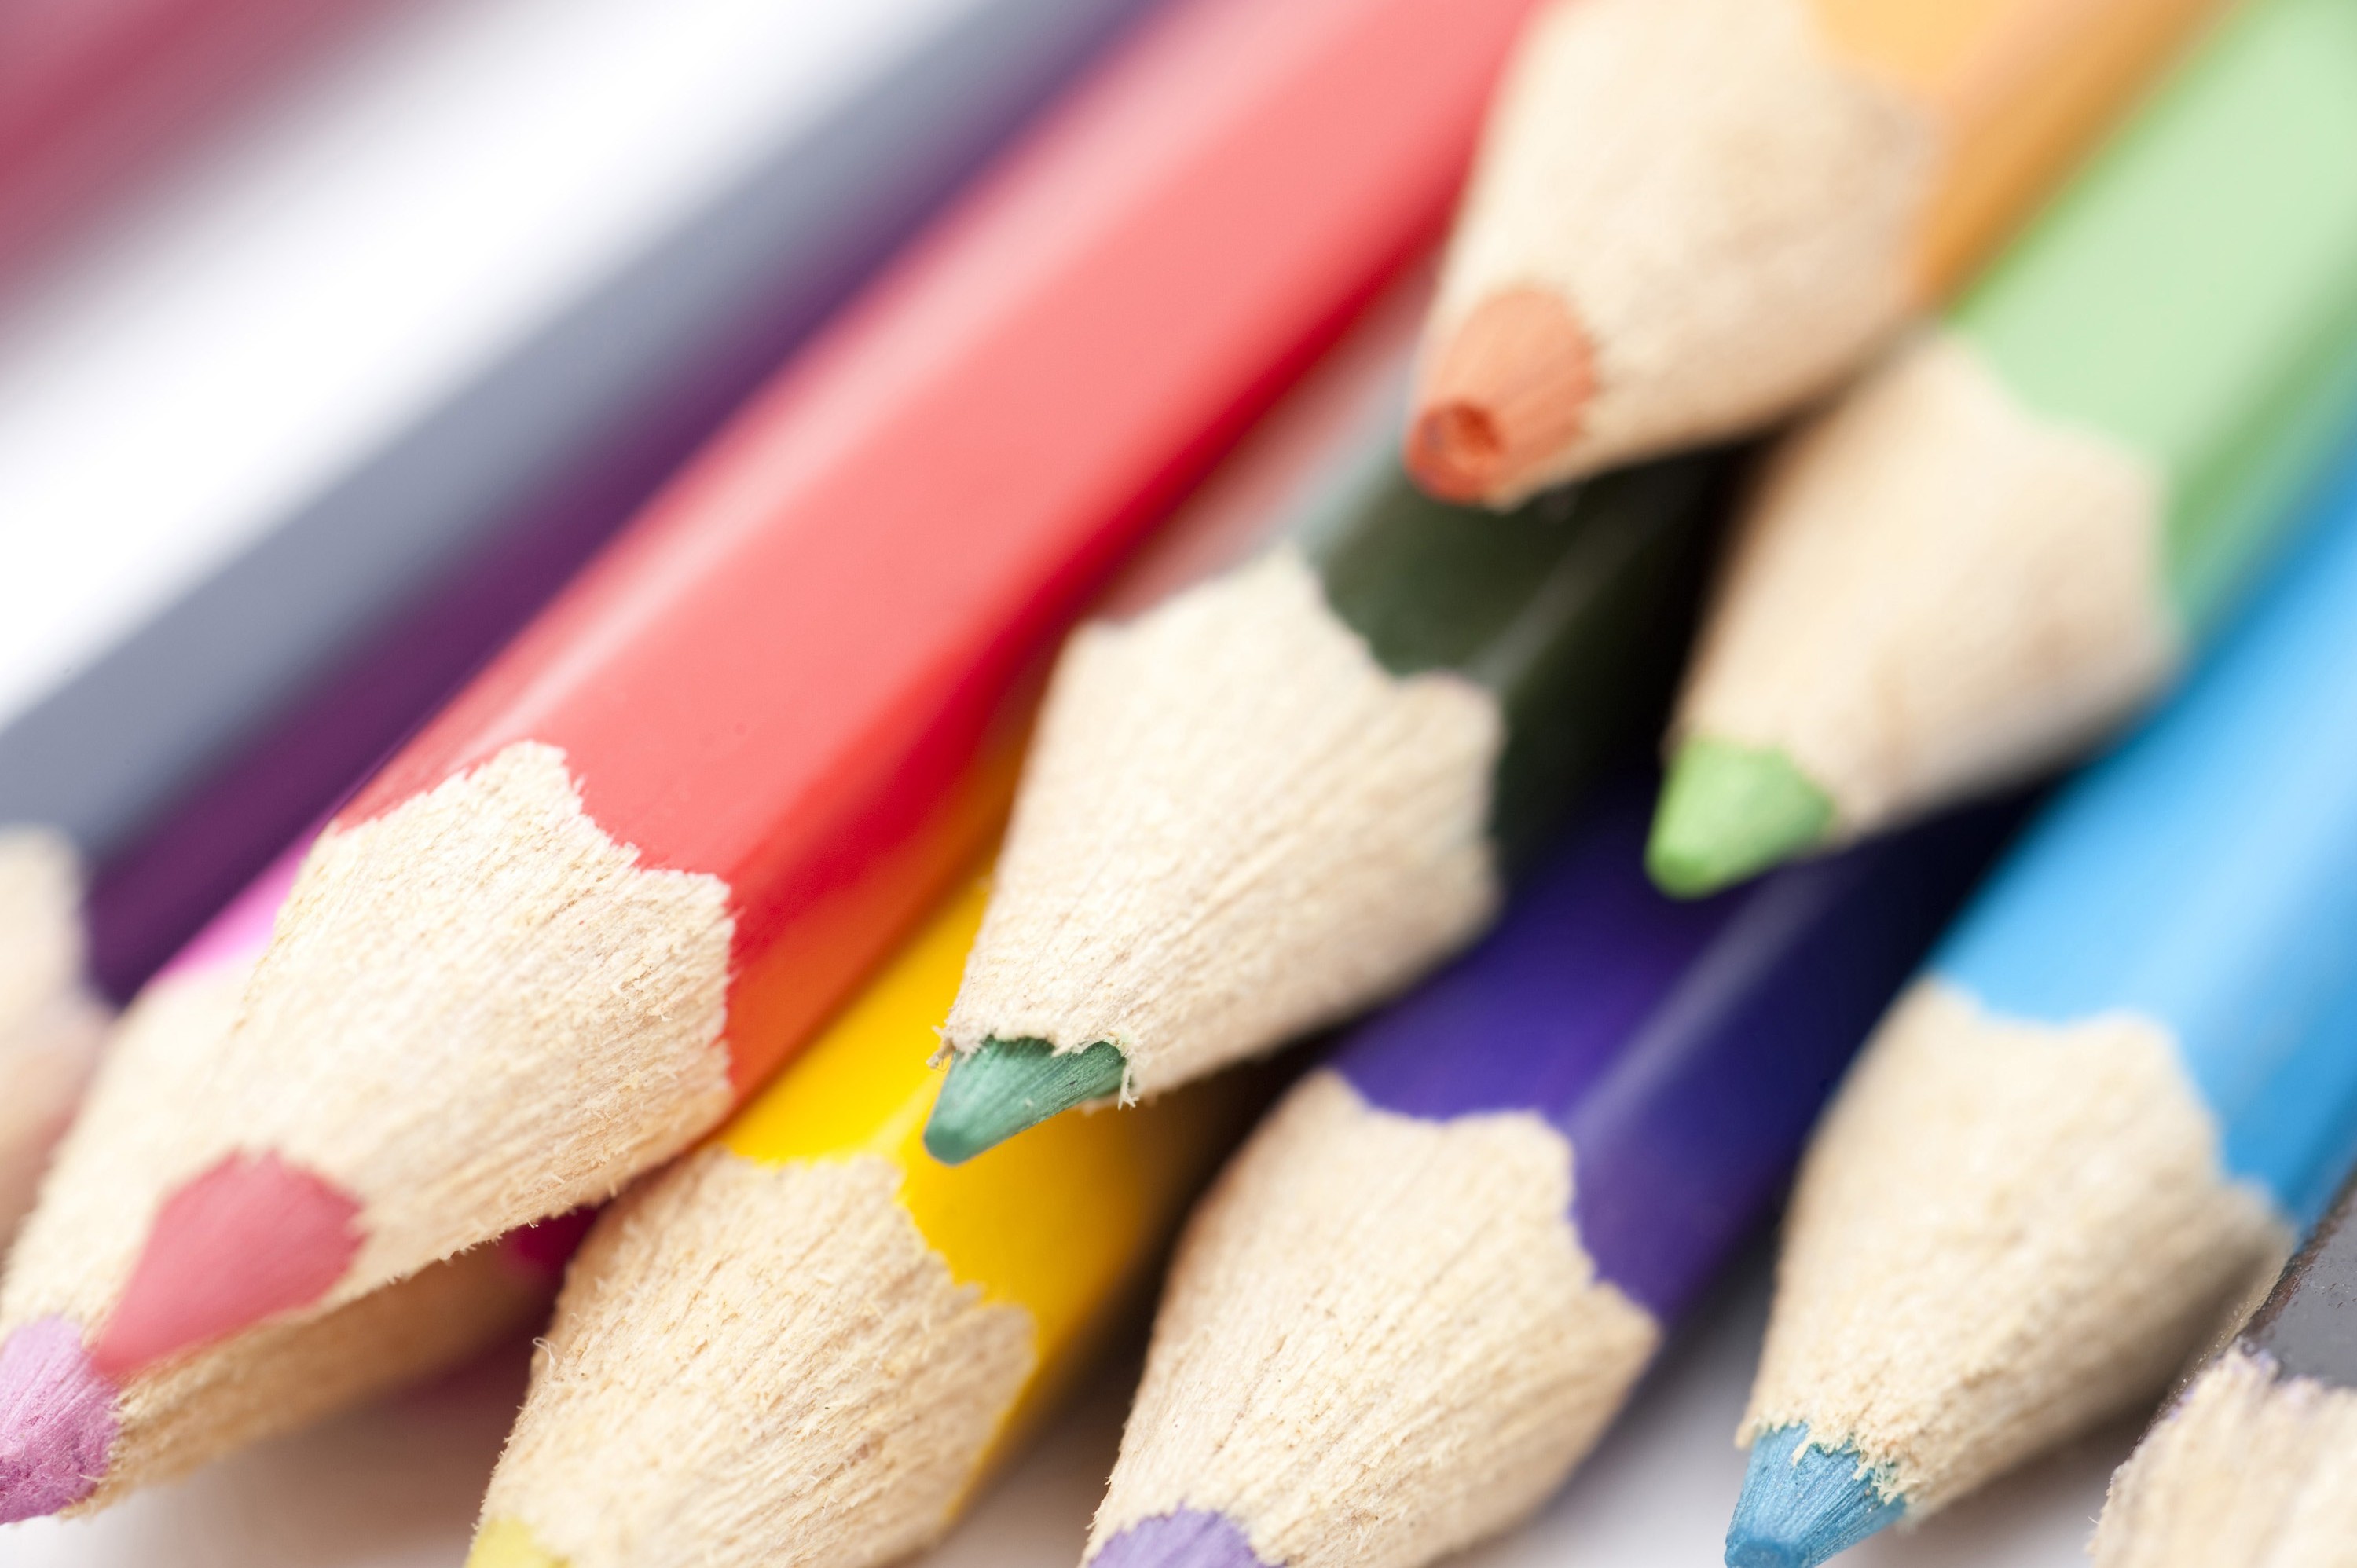 Free image of Pile of colored pencils